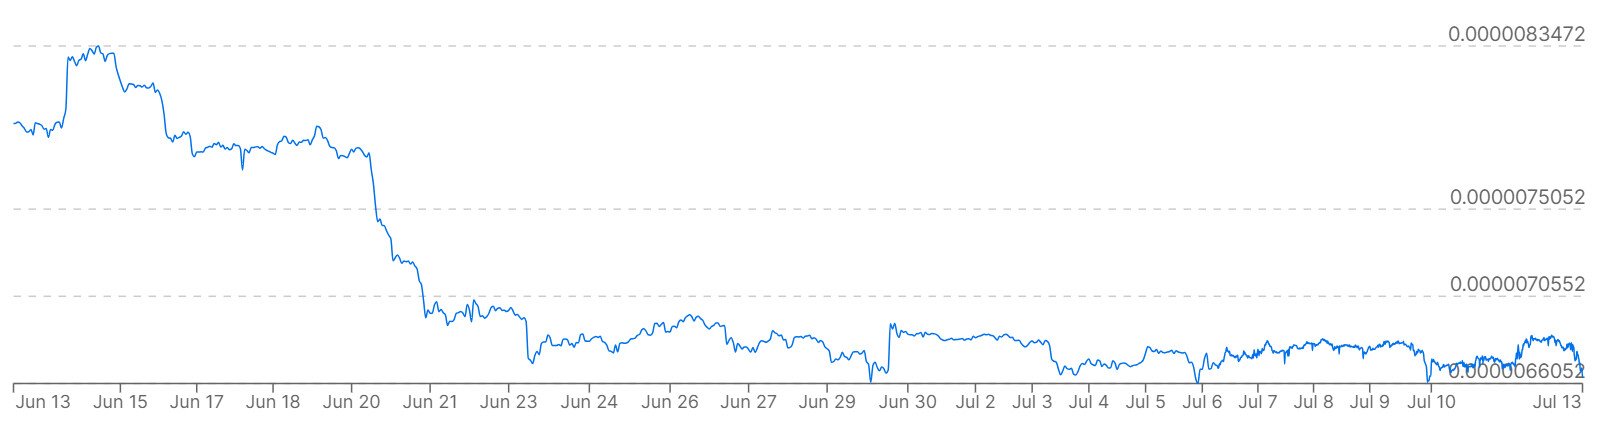 A graph showing prices of the Brazilian real versus Bitcoin over the past month.